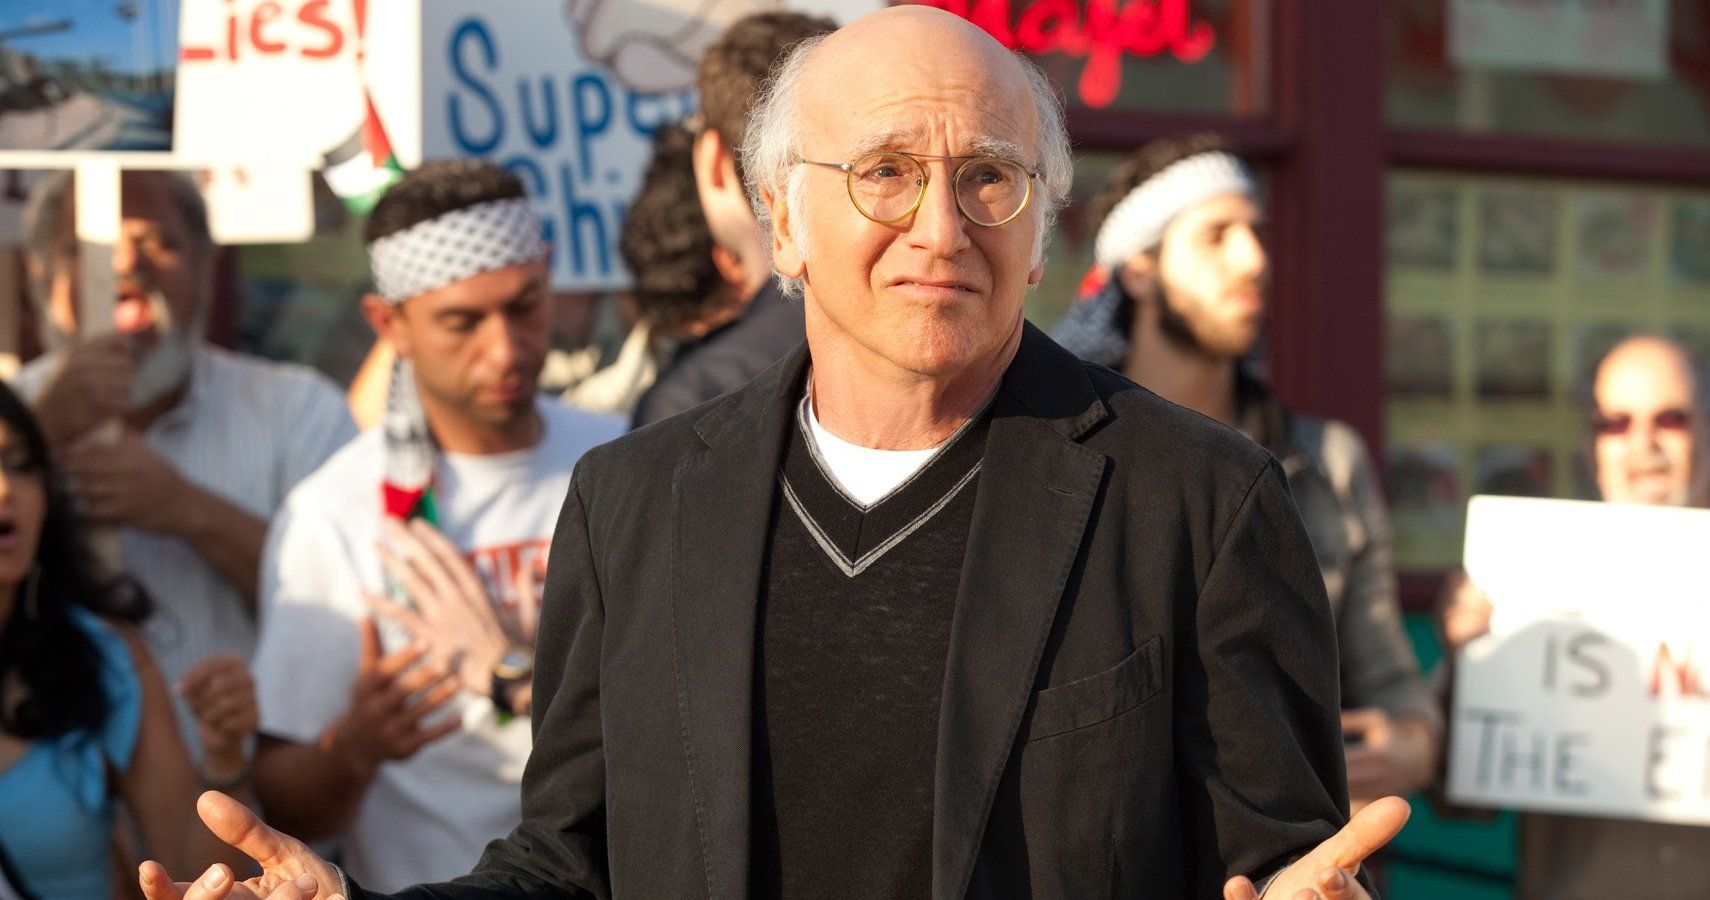 Curb Your Enthusiasm Which Character Are You Based On Your Zodiac